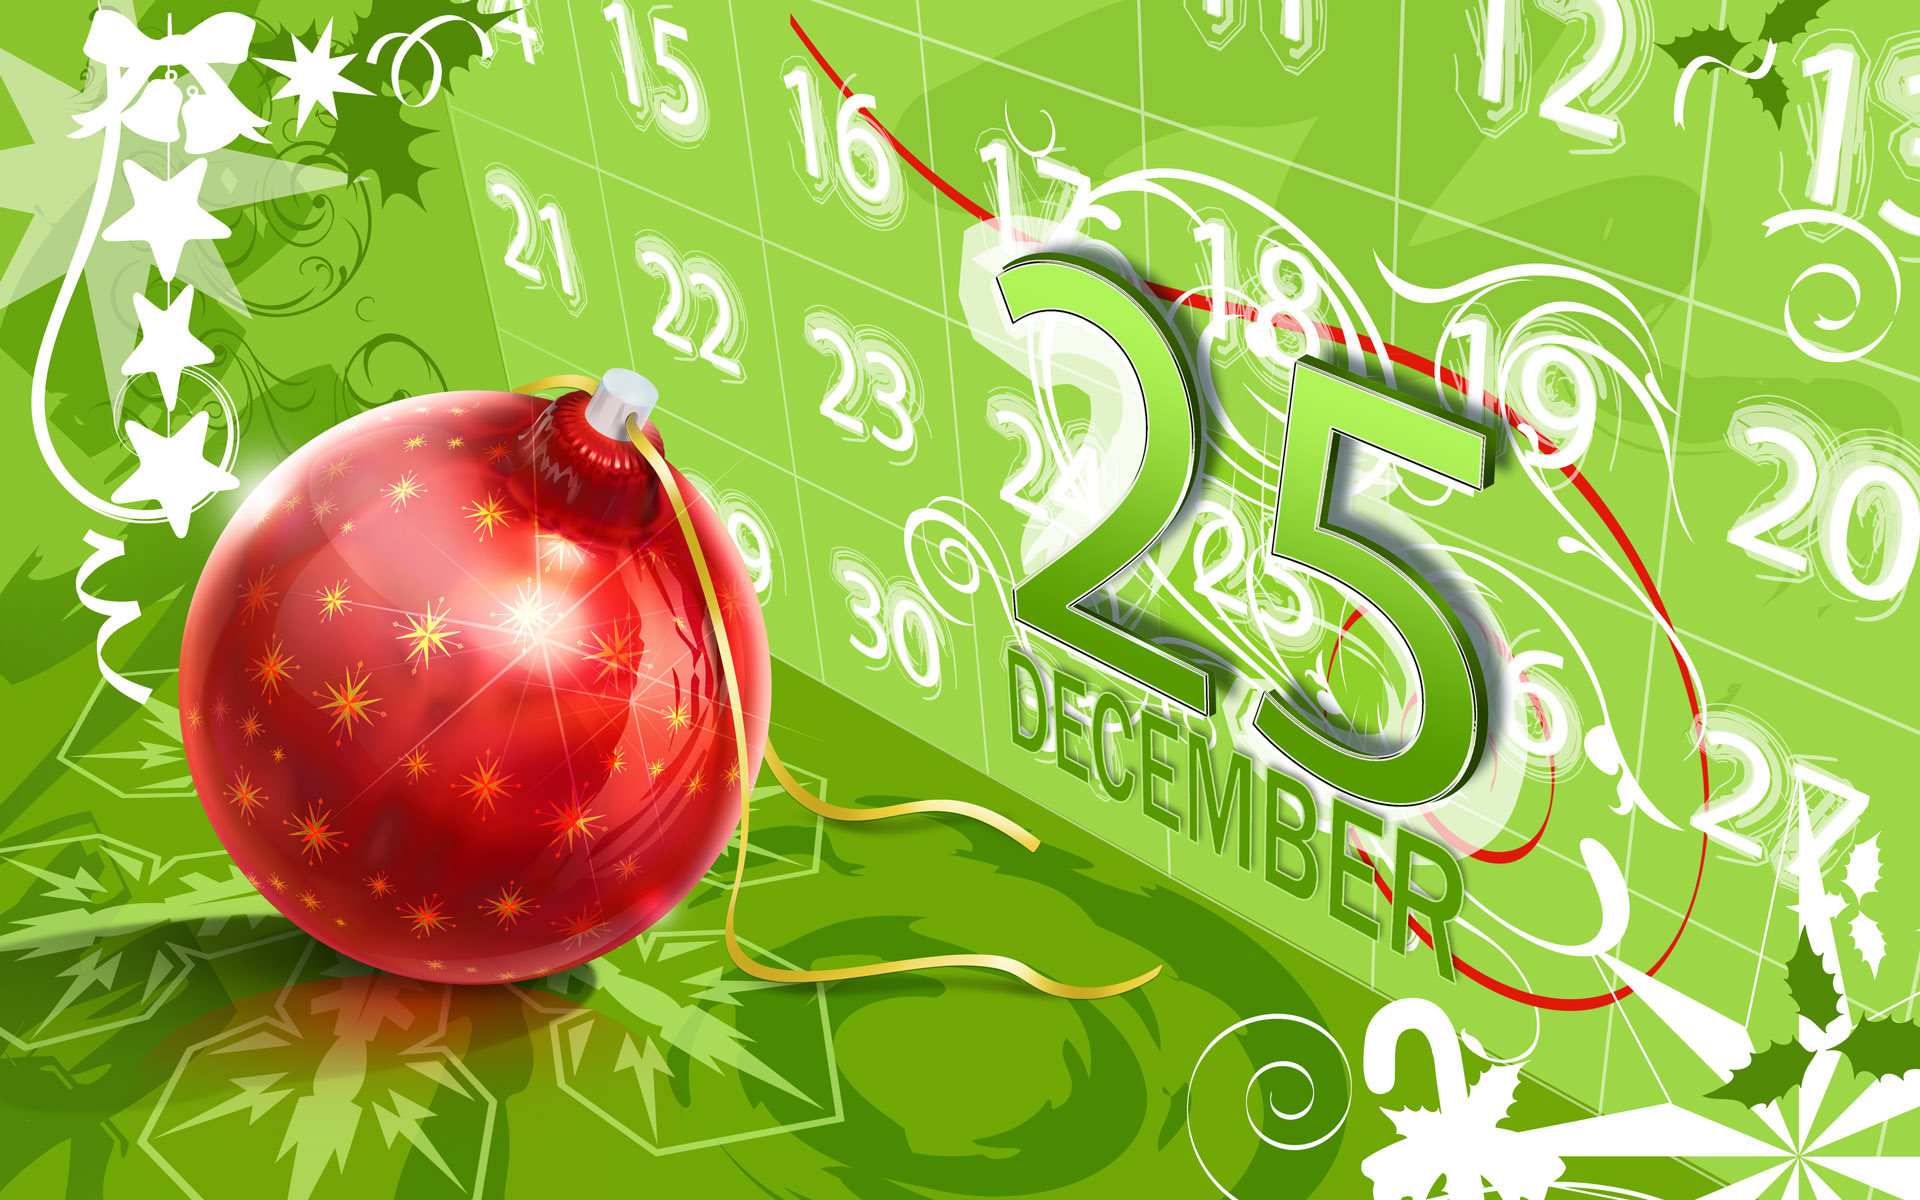 25 December Christmas Day Photo Download - HD Wallpaper 